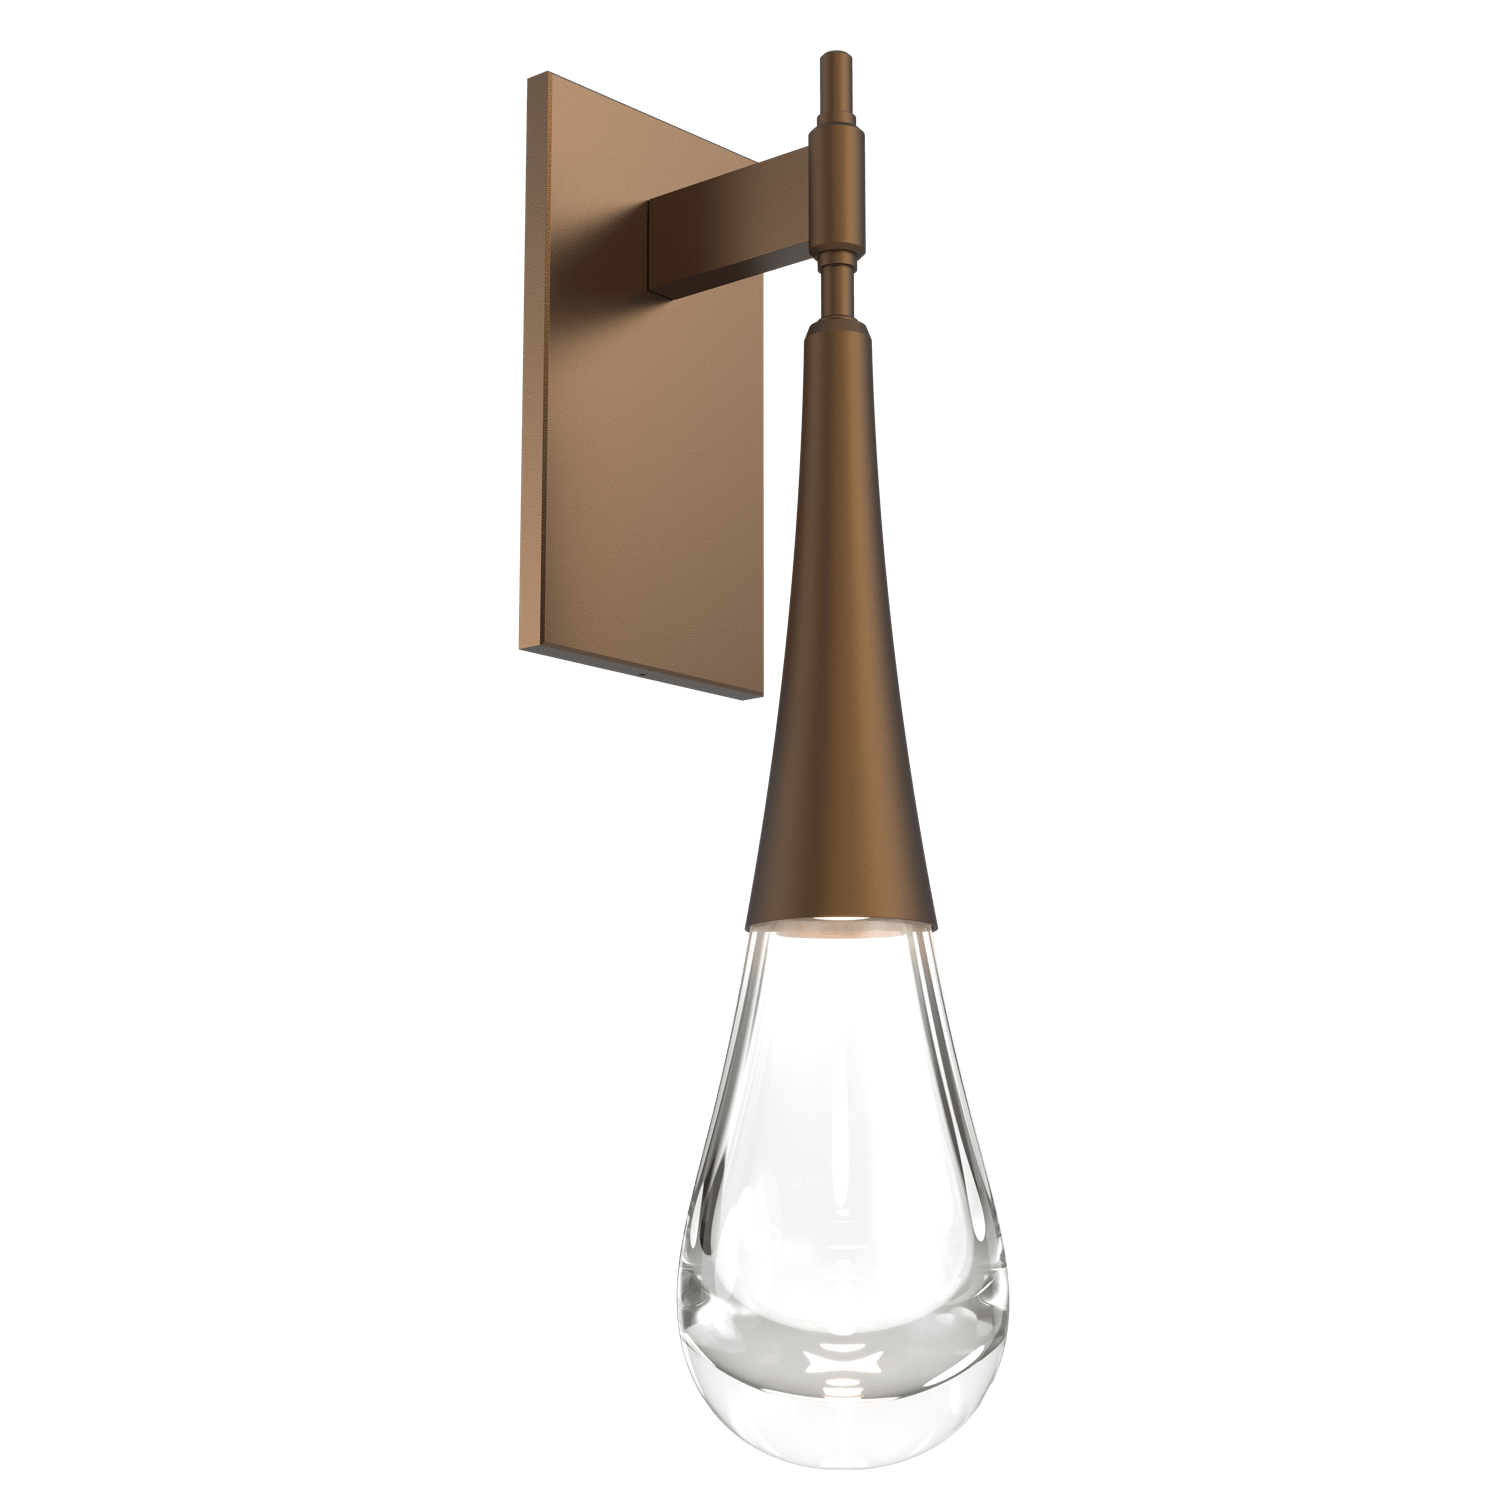 IDB0078-01-FB-Hammerton-Studio-Raindrop-wall-sconce-with-flat-bronze-finish-and-clear-blown-glass-shades-and-LED-lamping